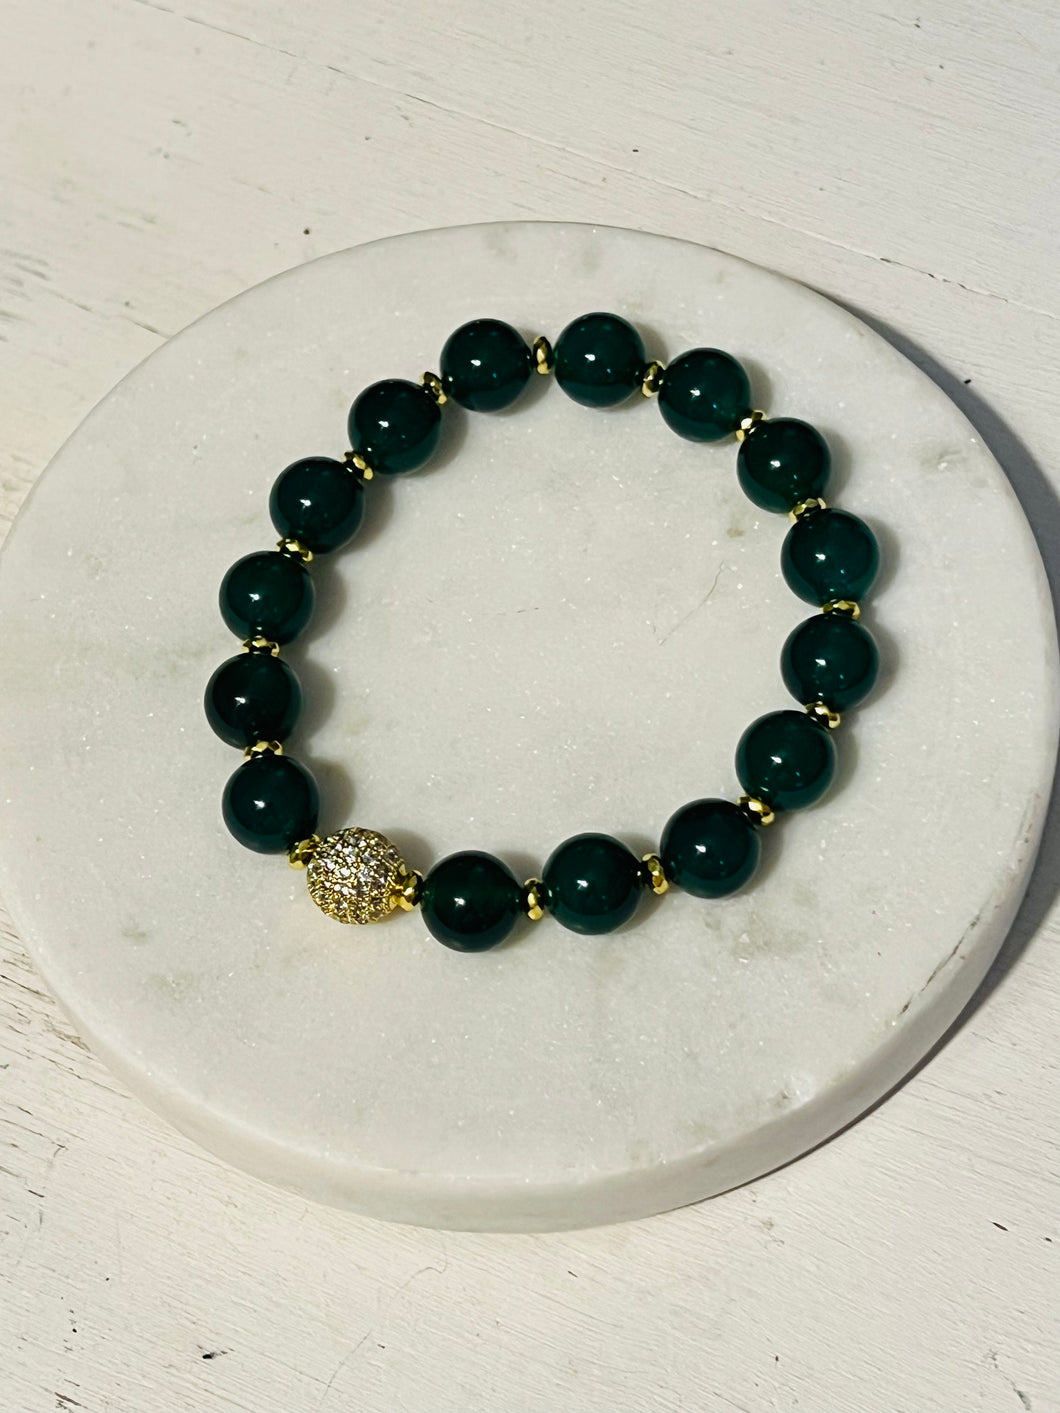 10mm Green Agate and Gold Hematite Pave Bracelet